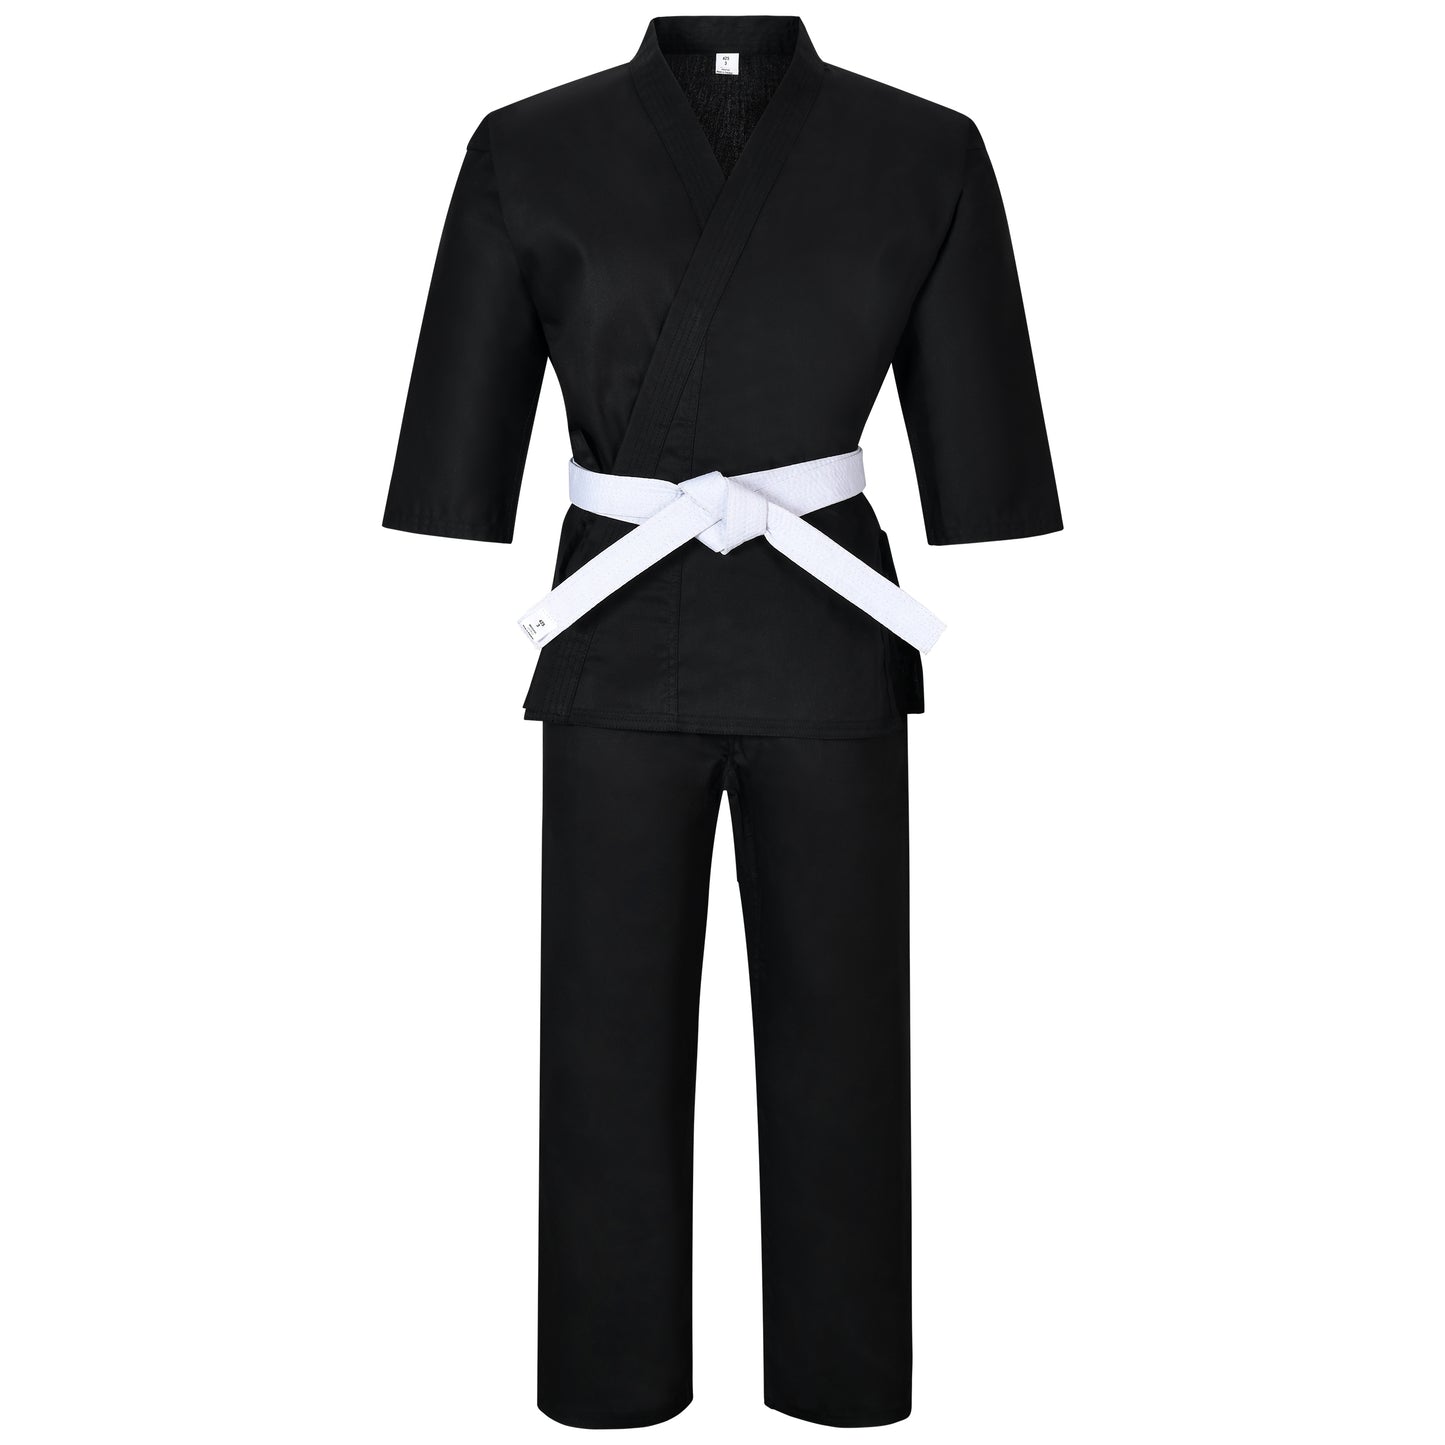 Karate Uniform 7.5oz Medium Weight For Kids & Adults Student Martial Arts Gi With Free White Belt